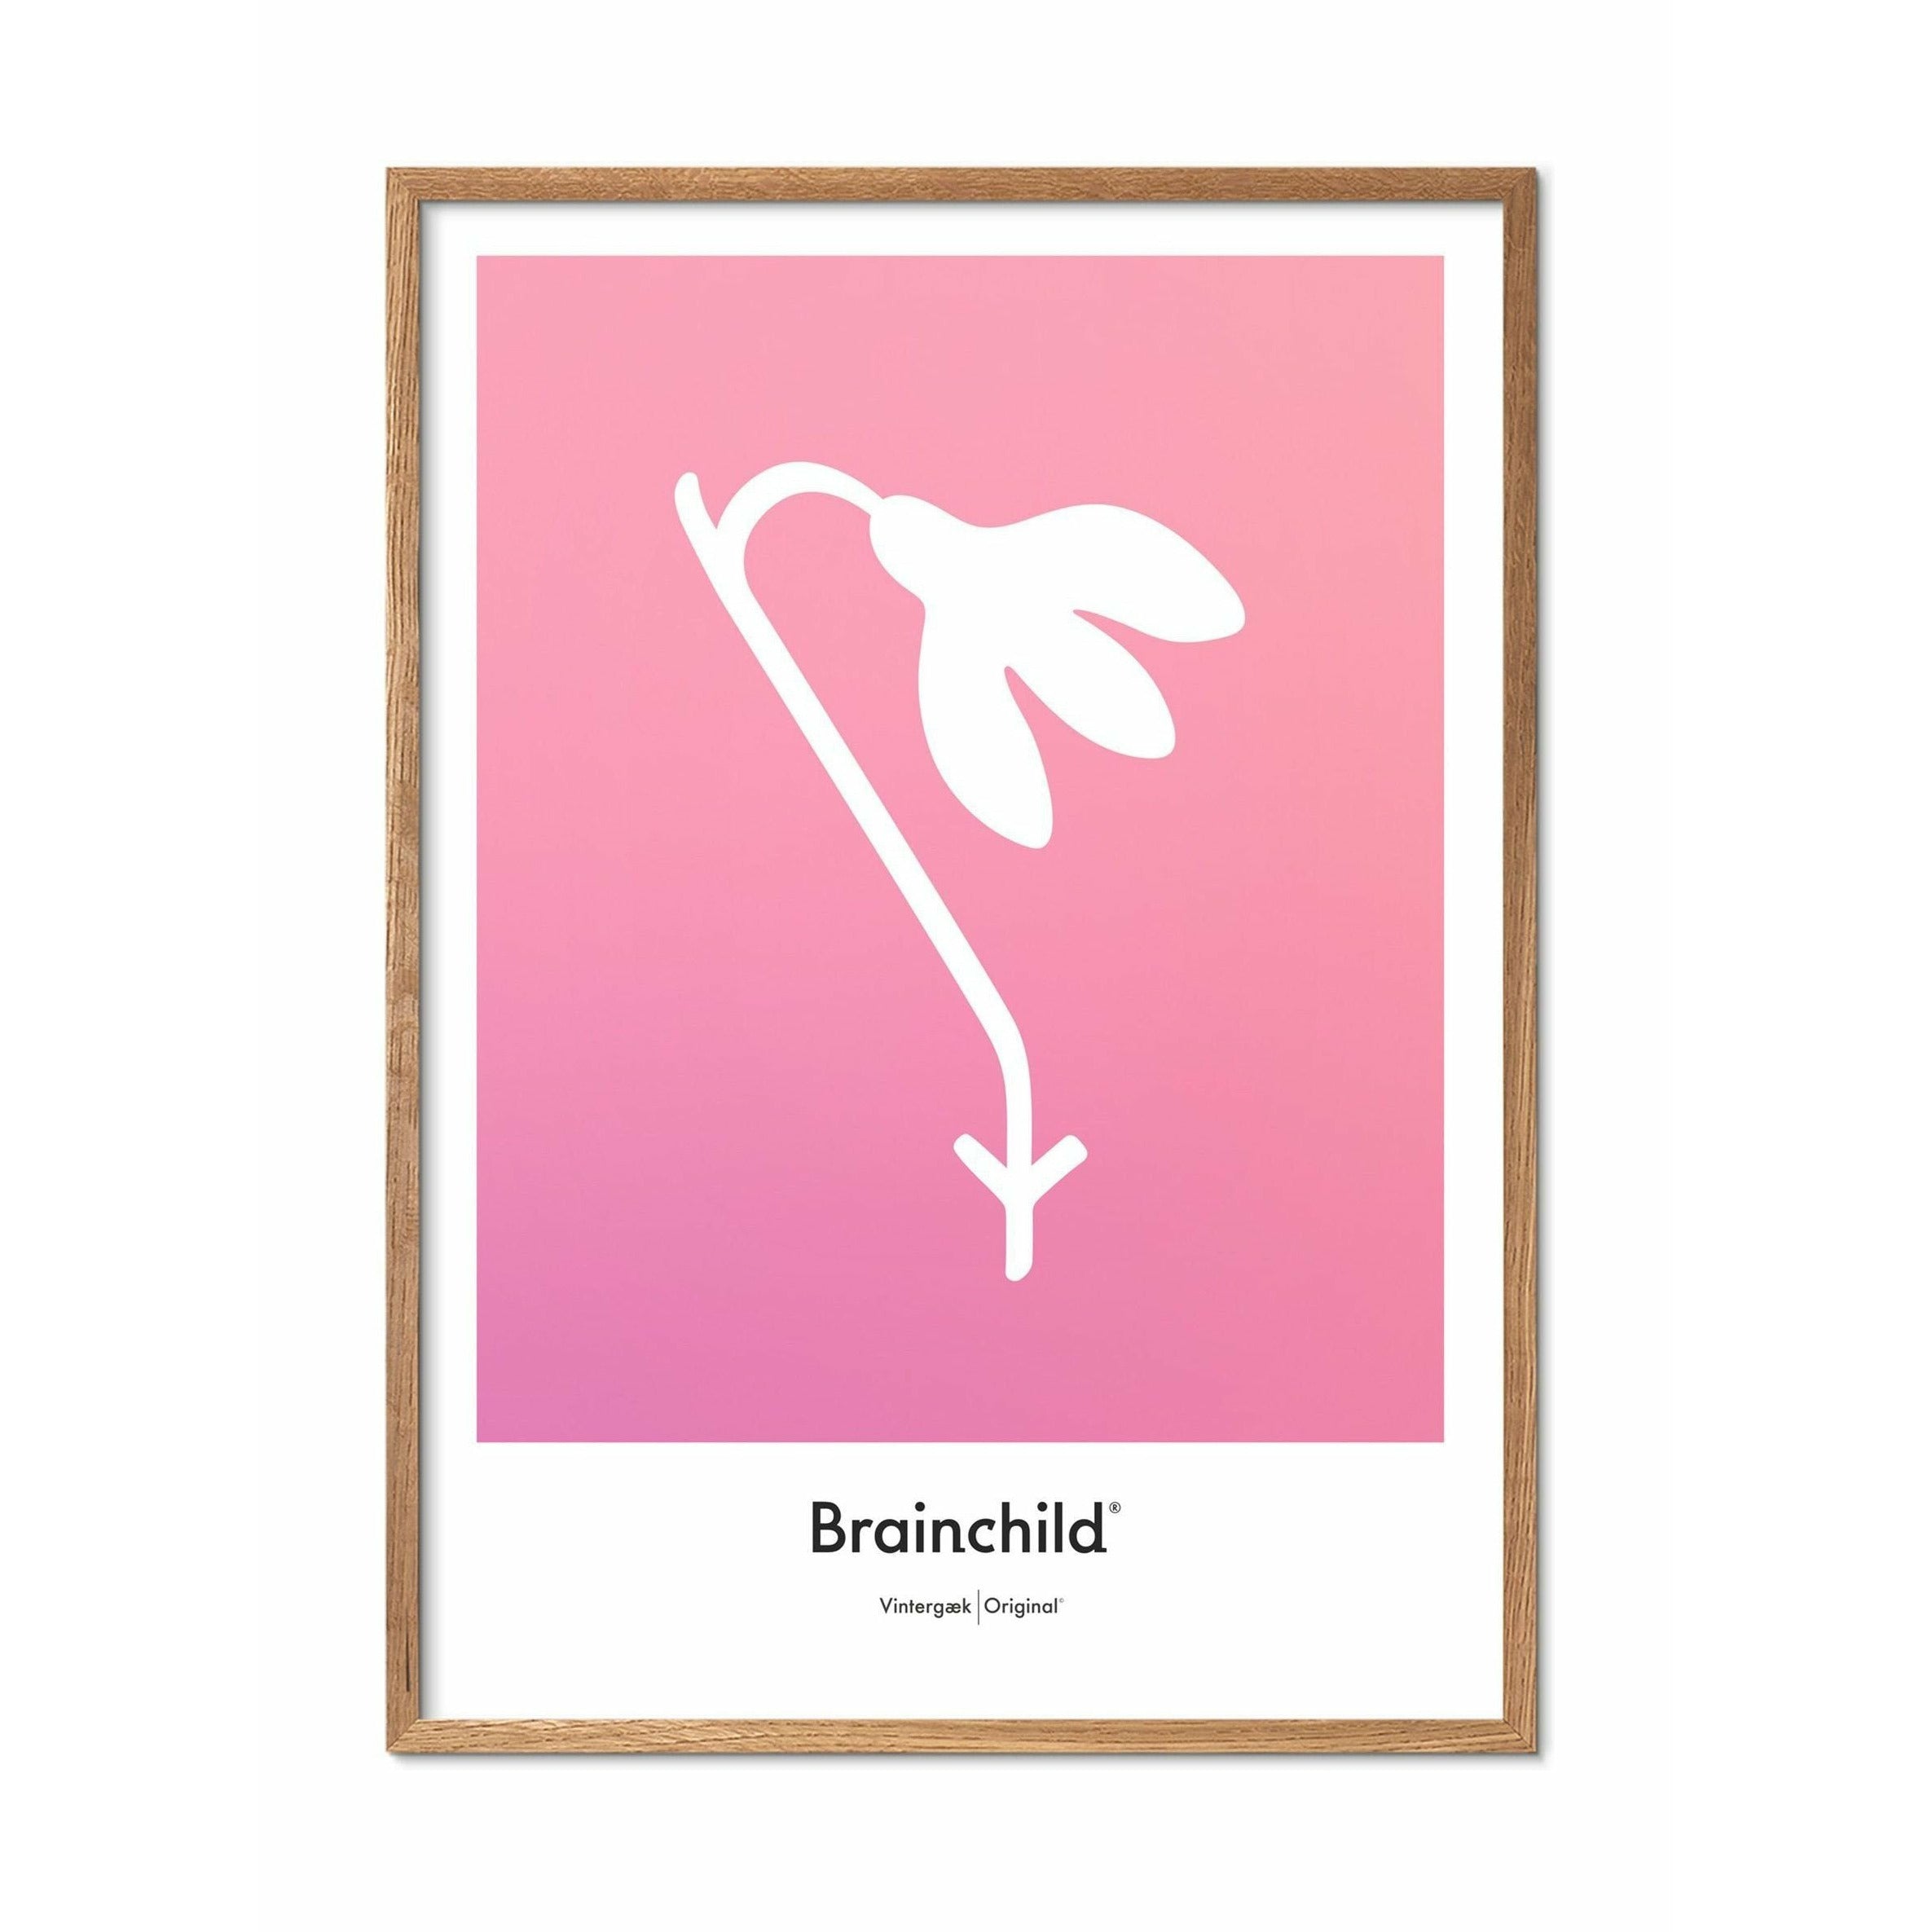 Brainchild Snowdrop Design Icon Poster, Frame Made Of Light Wood A5, Pink